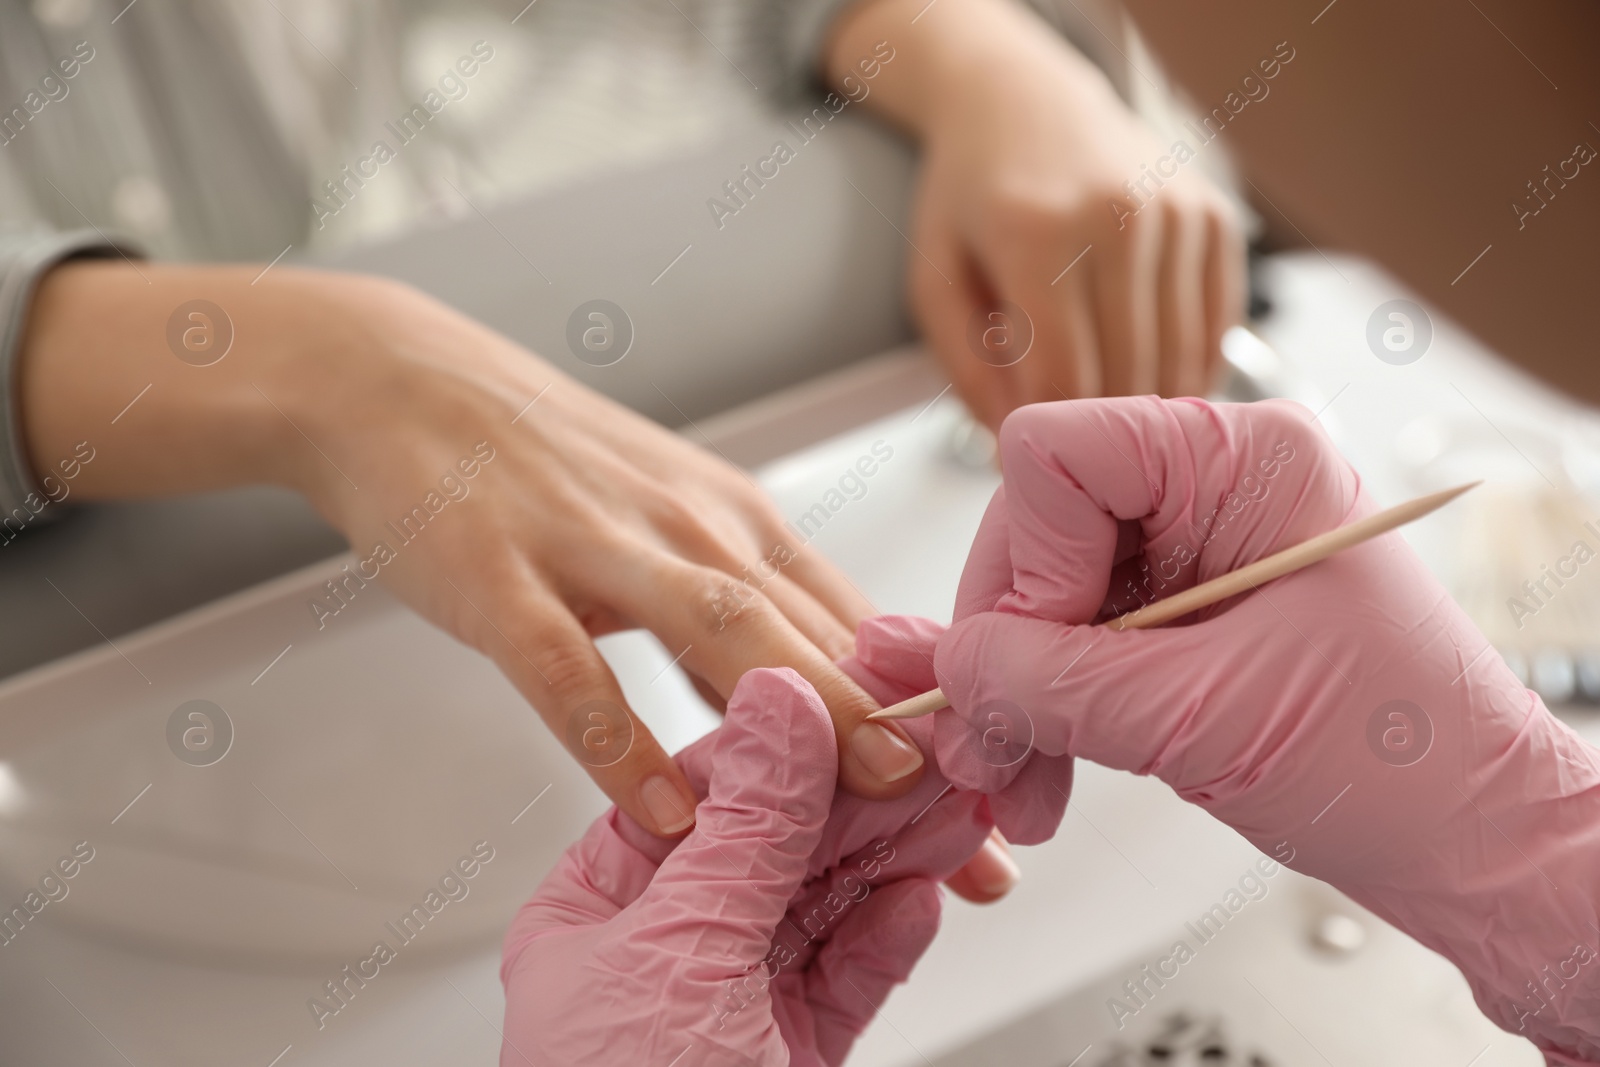 Photo of Professional manicurist working with client in beauty salon, closeup